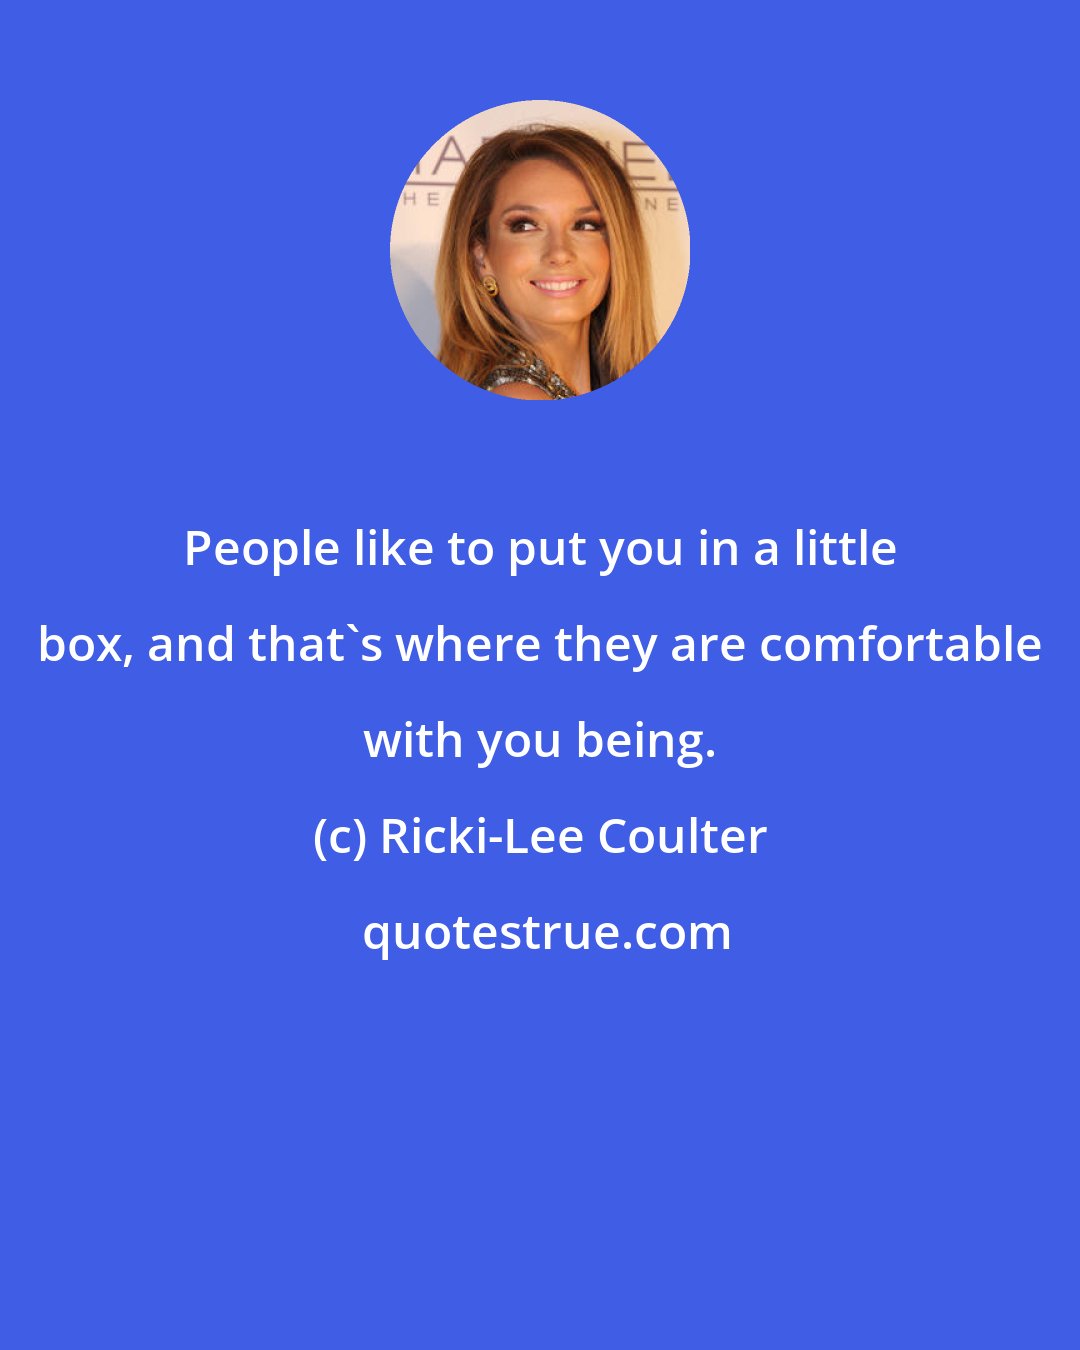 Ricki-Lee Coulter: People like to put you in a little box, and that's where they are comfortable with you being.